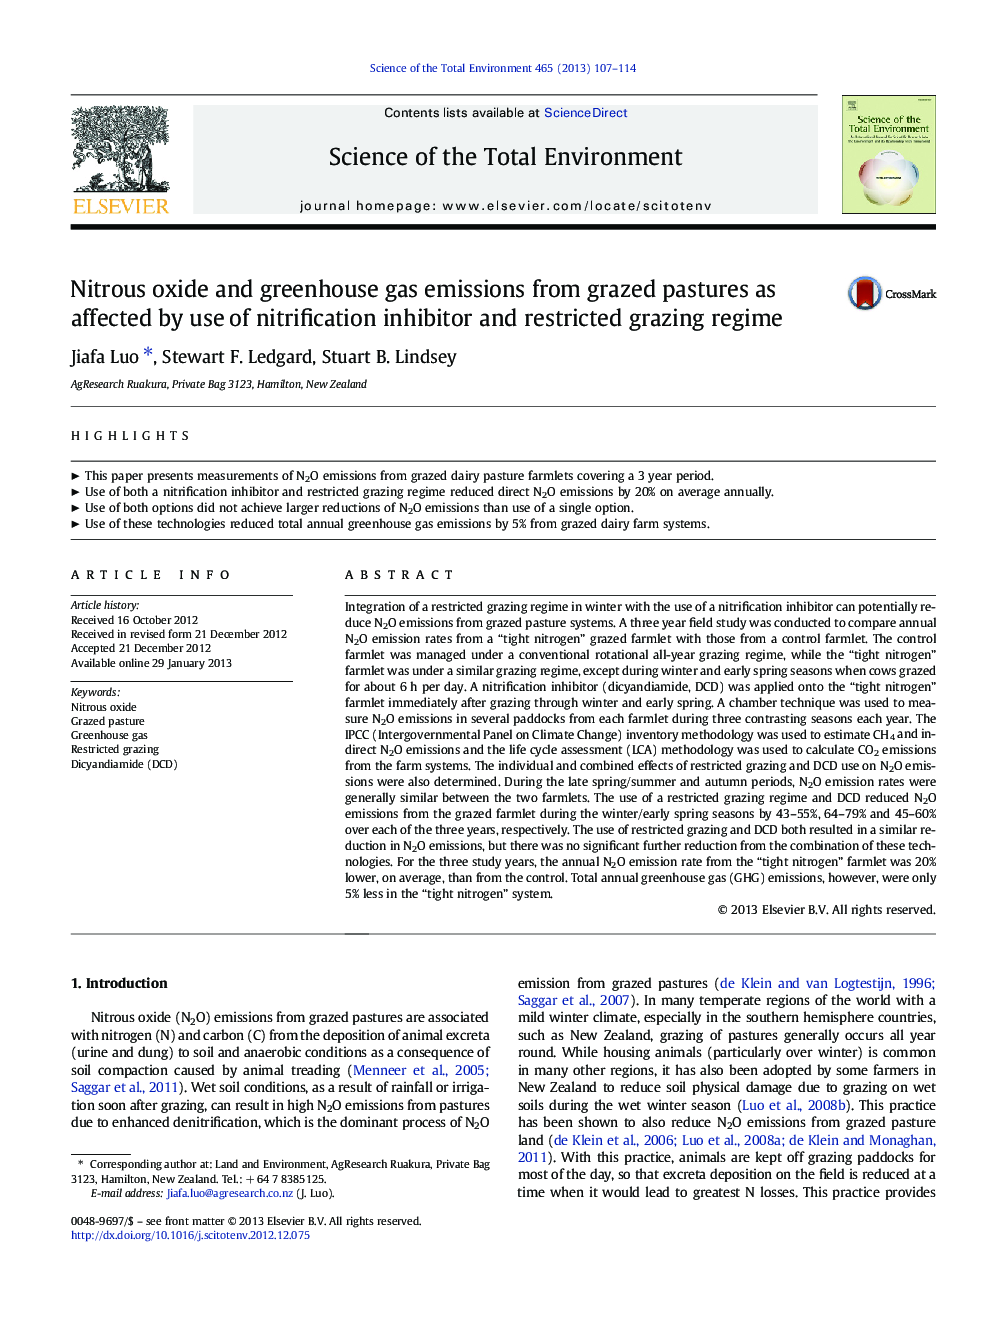 Nitrous oxide and greenhouse gas emissions from grazed pastures as affected by use of nitrification inhibitor and restricted grazing regime